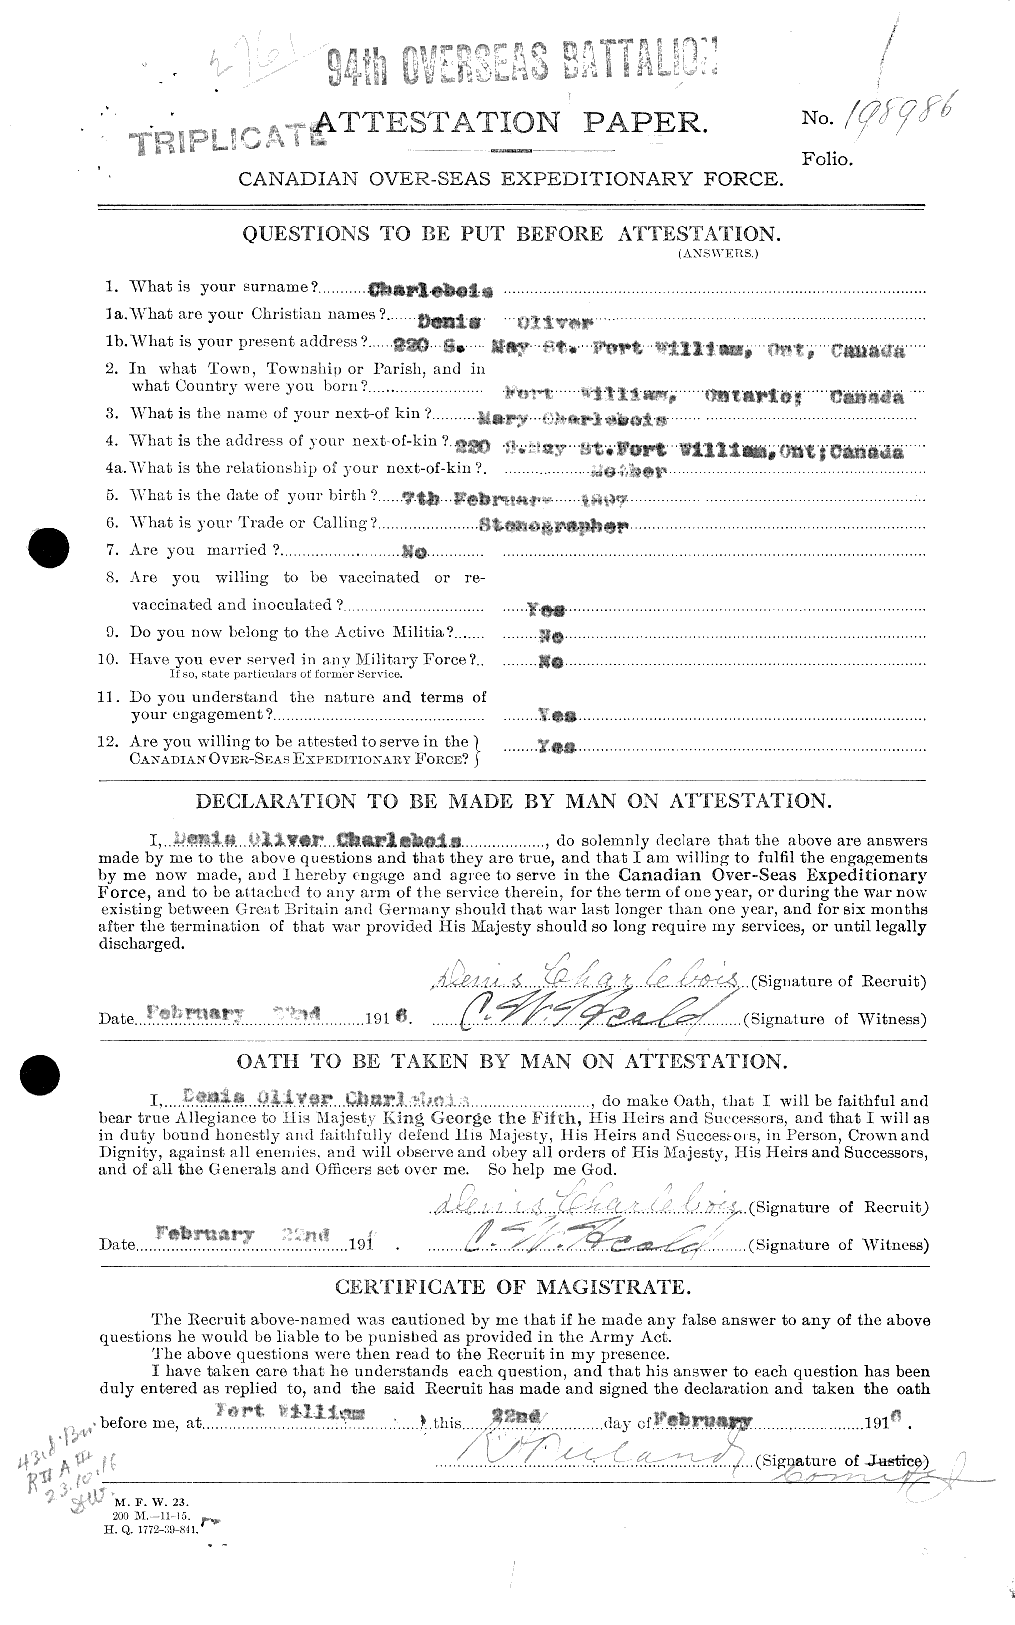 Personnel Records of the First World War - CEF 015600a